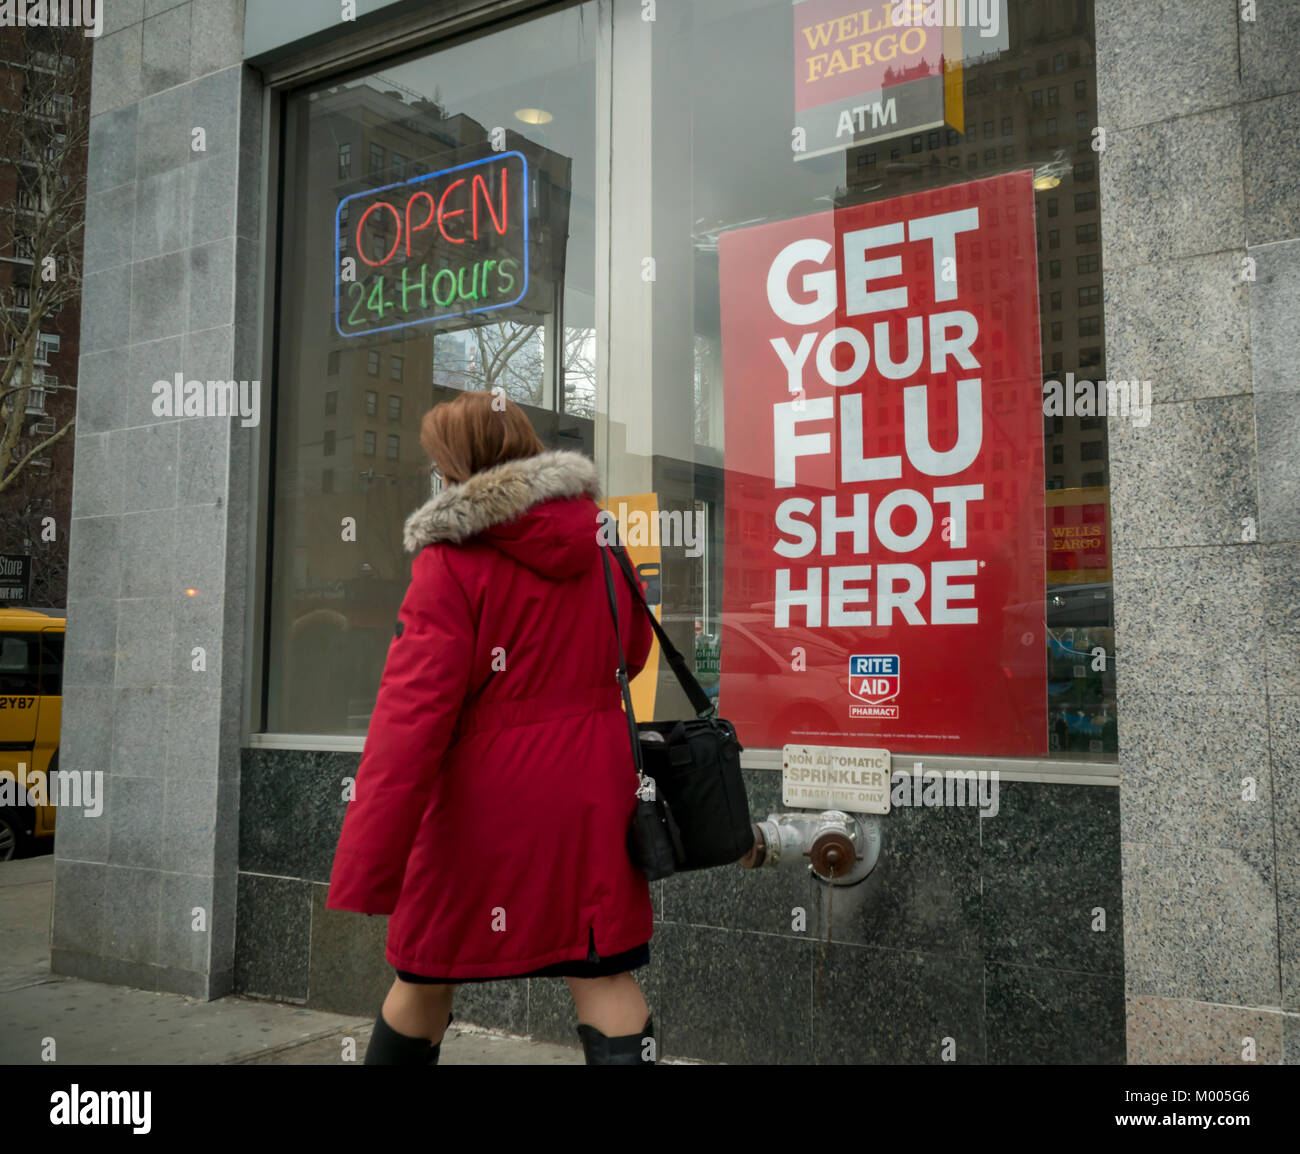 A sign advertises that flu shots are available at a Rite Aid drugstore in New York on Tuesday, January 16, 2018. The Centers for Disease Control and Prevention is reporting that this season's flu activity is widespread across the continental United States for the first time in the 13 years that they have been tracking the spread of the disease. This year's flavor of influenza A is H3N2. (© Richard B. Levine) Stock Photo